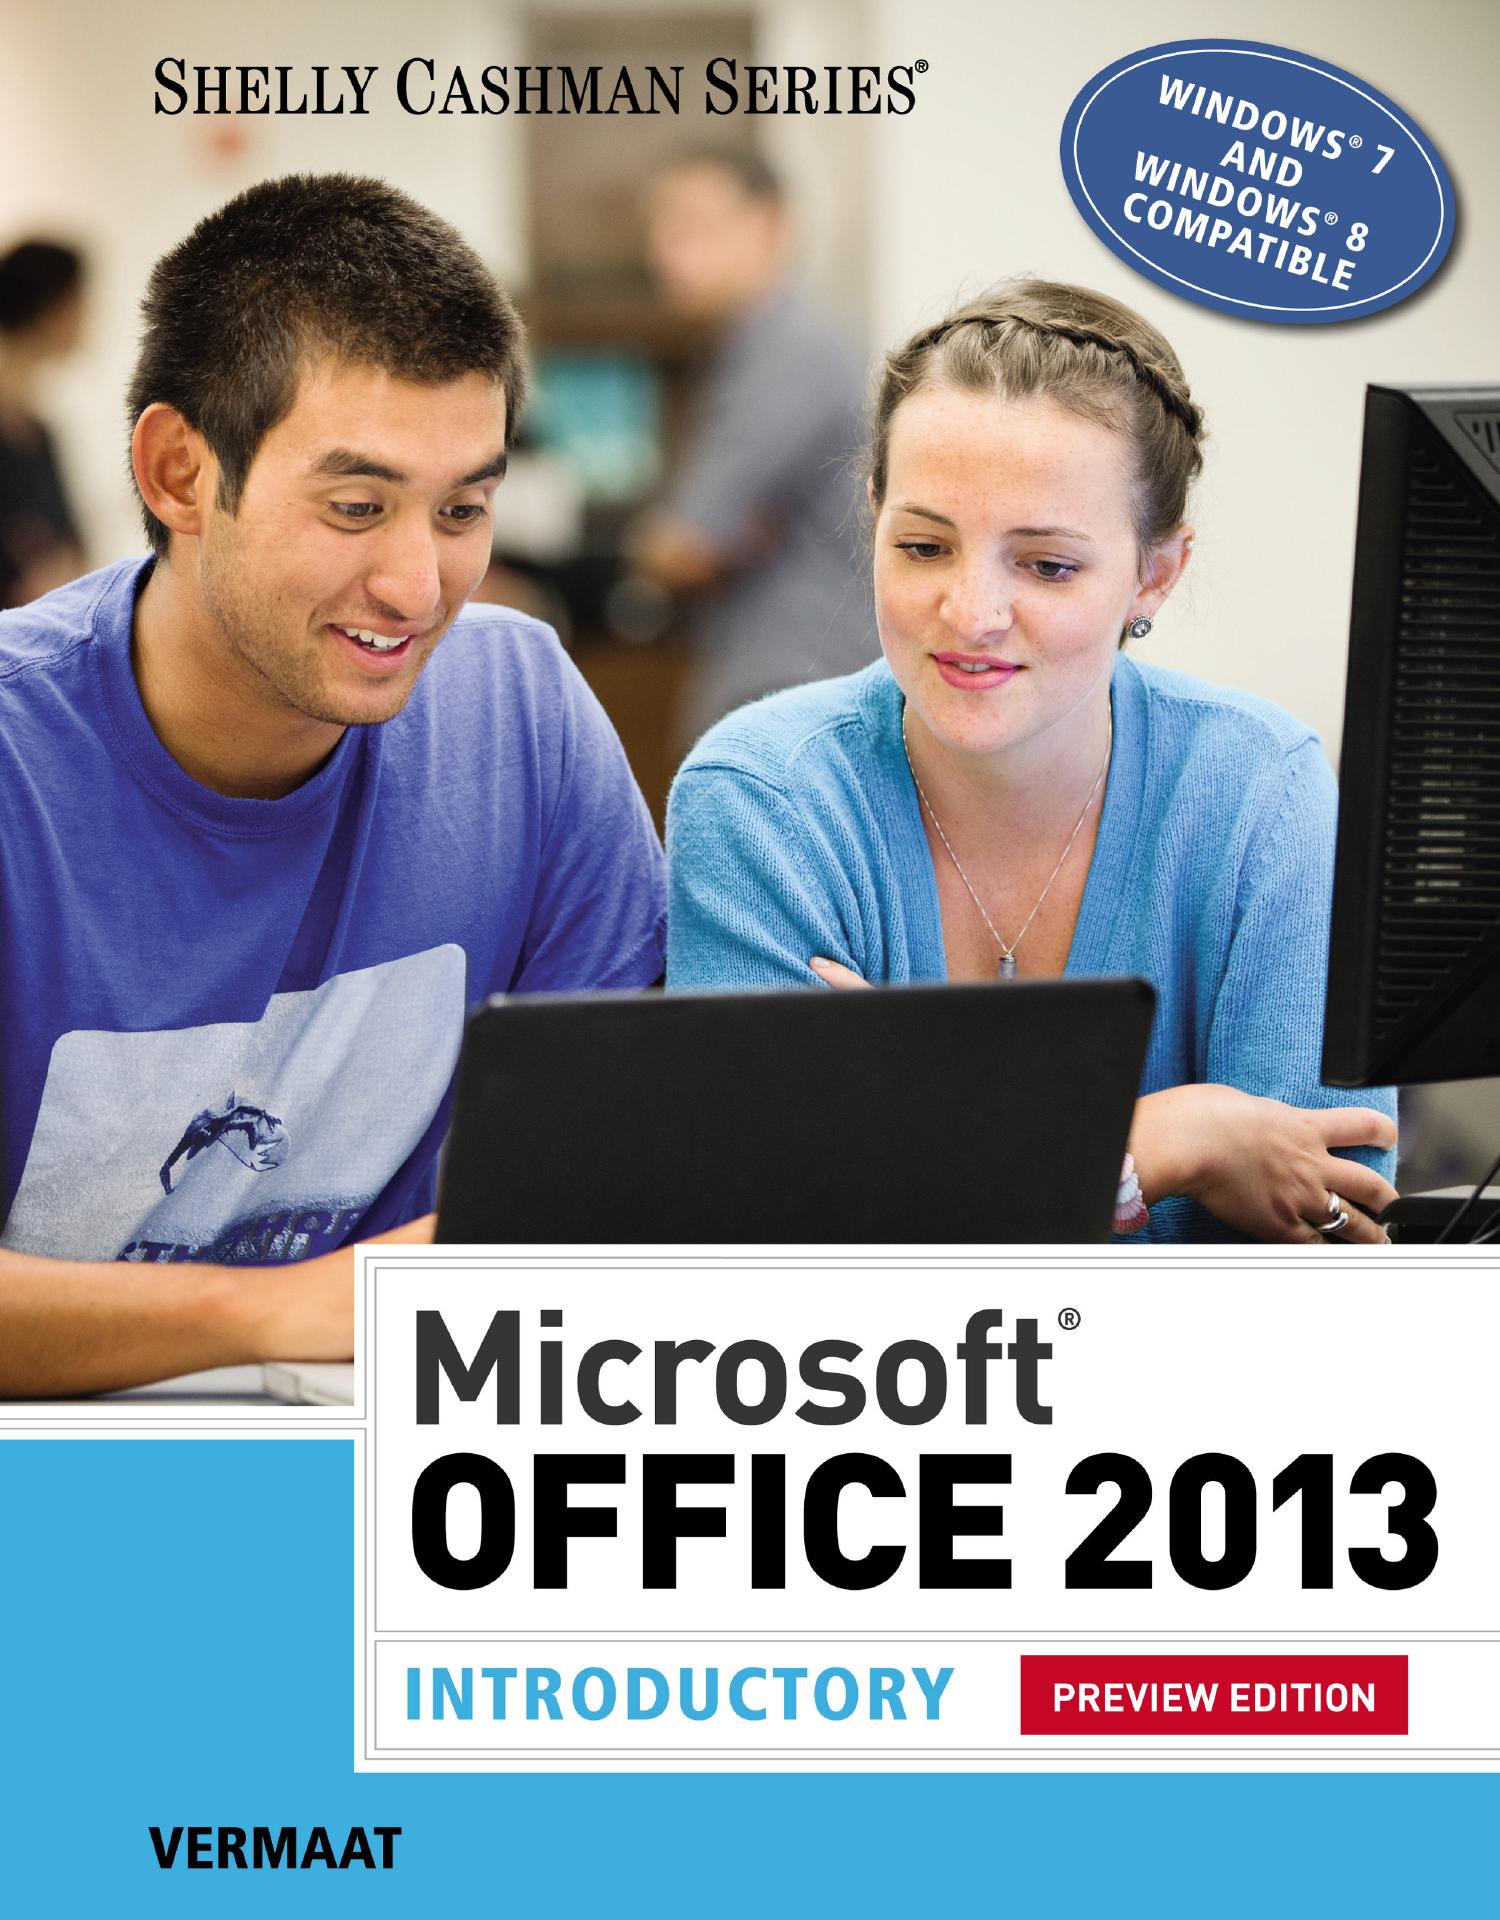 Microsoft Office 2013 introductory 2014 Misty E. Vermaat.pdf DocDroid